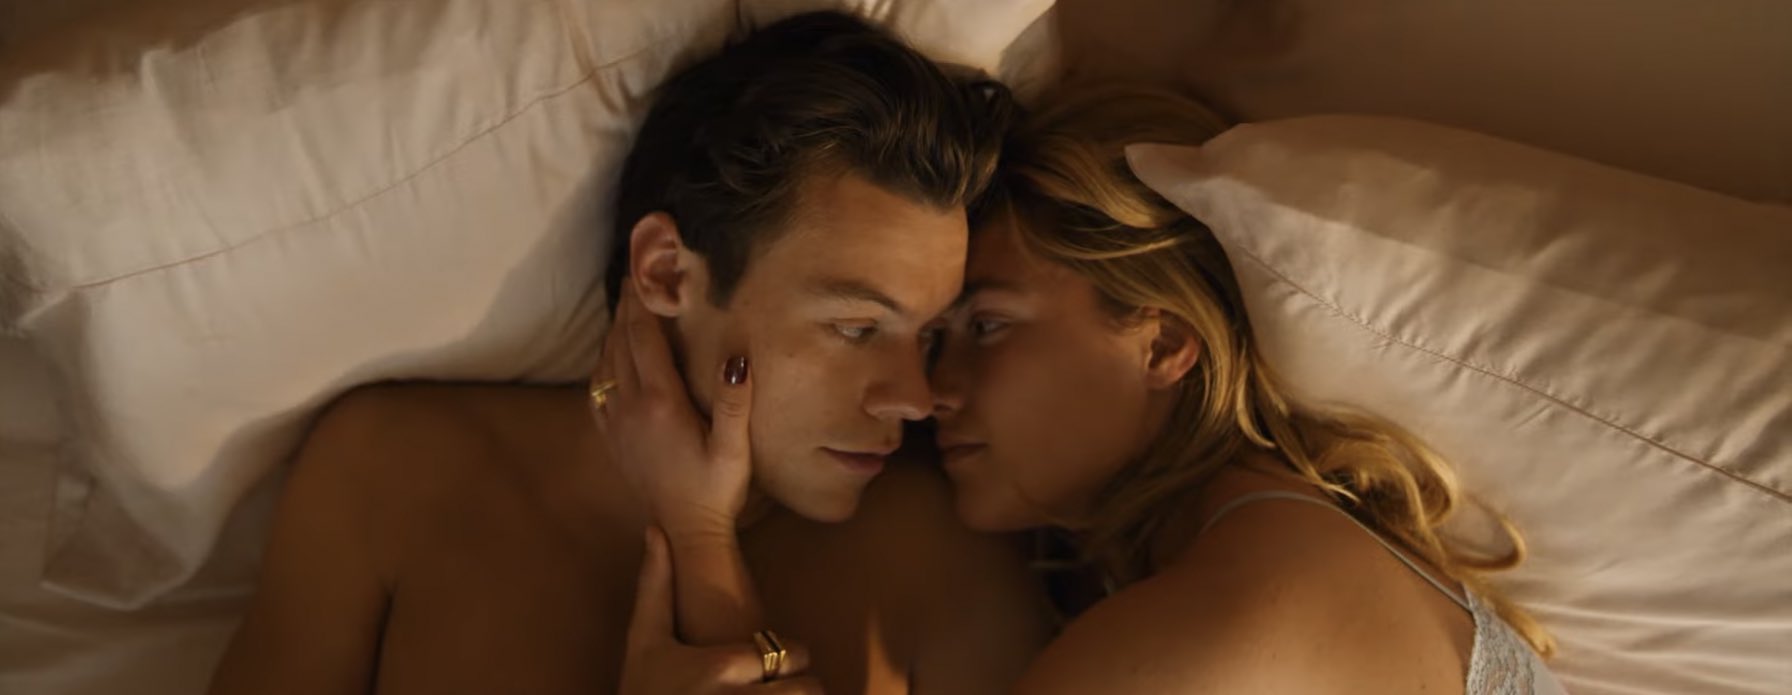 Don't Worry Darling: the film directed by Olivia Wilde with Florence Pugh and Harry Styles